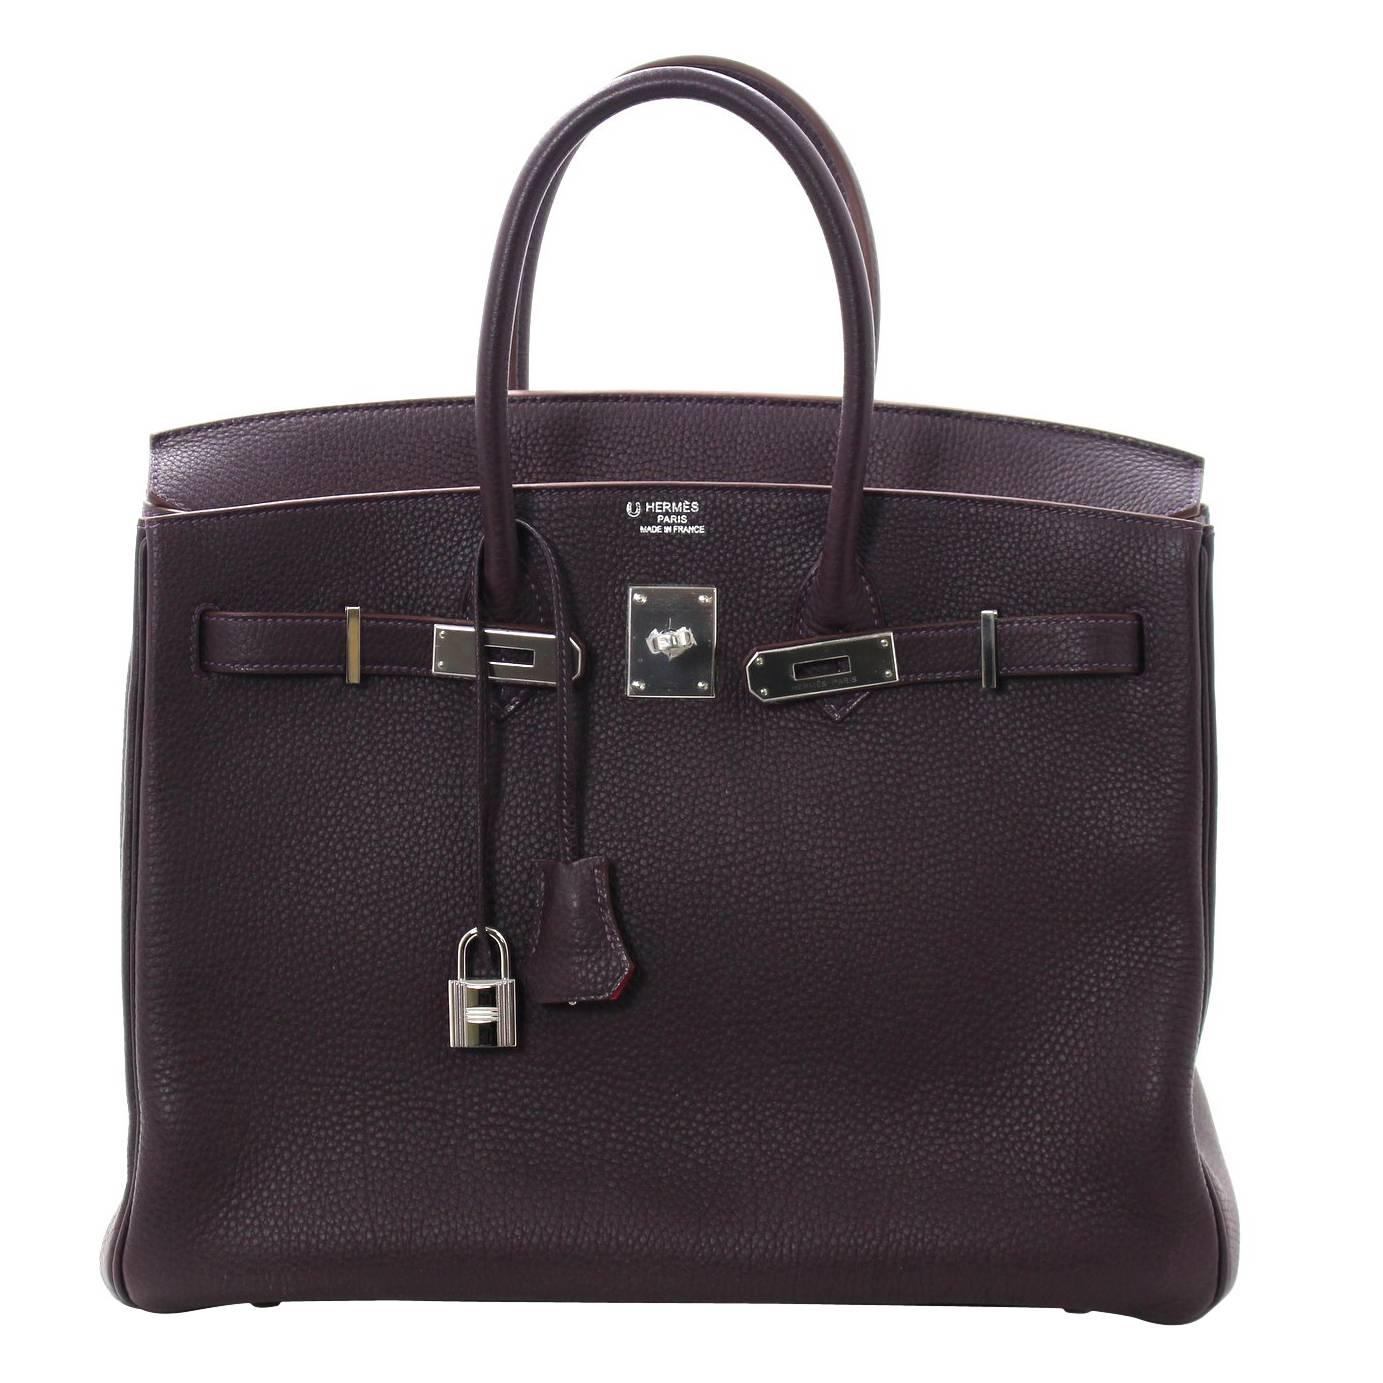 Pristine, store fresh condition (plastic on hardware) Hermès Birkin Bag in PRUNE Purple Togo Leather with ROSE SHOCKING interior, PHW 35 cm, P stamp
Crafted by hand and considered by many as the epitome of luxury items, Birkins are in extremely